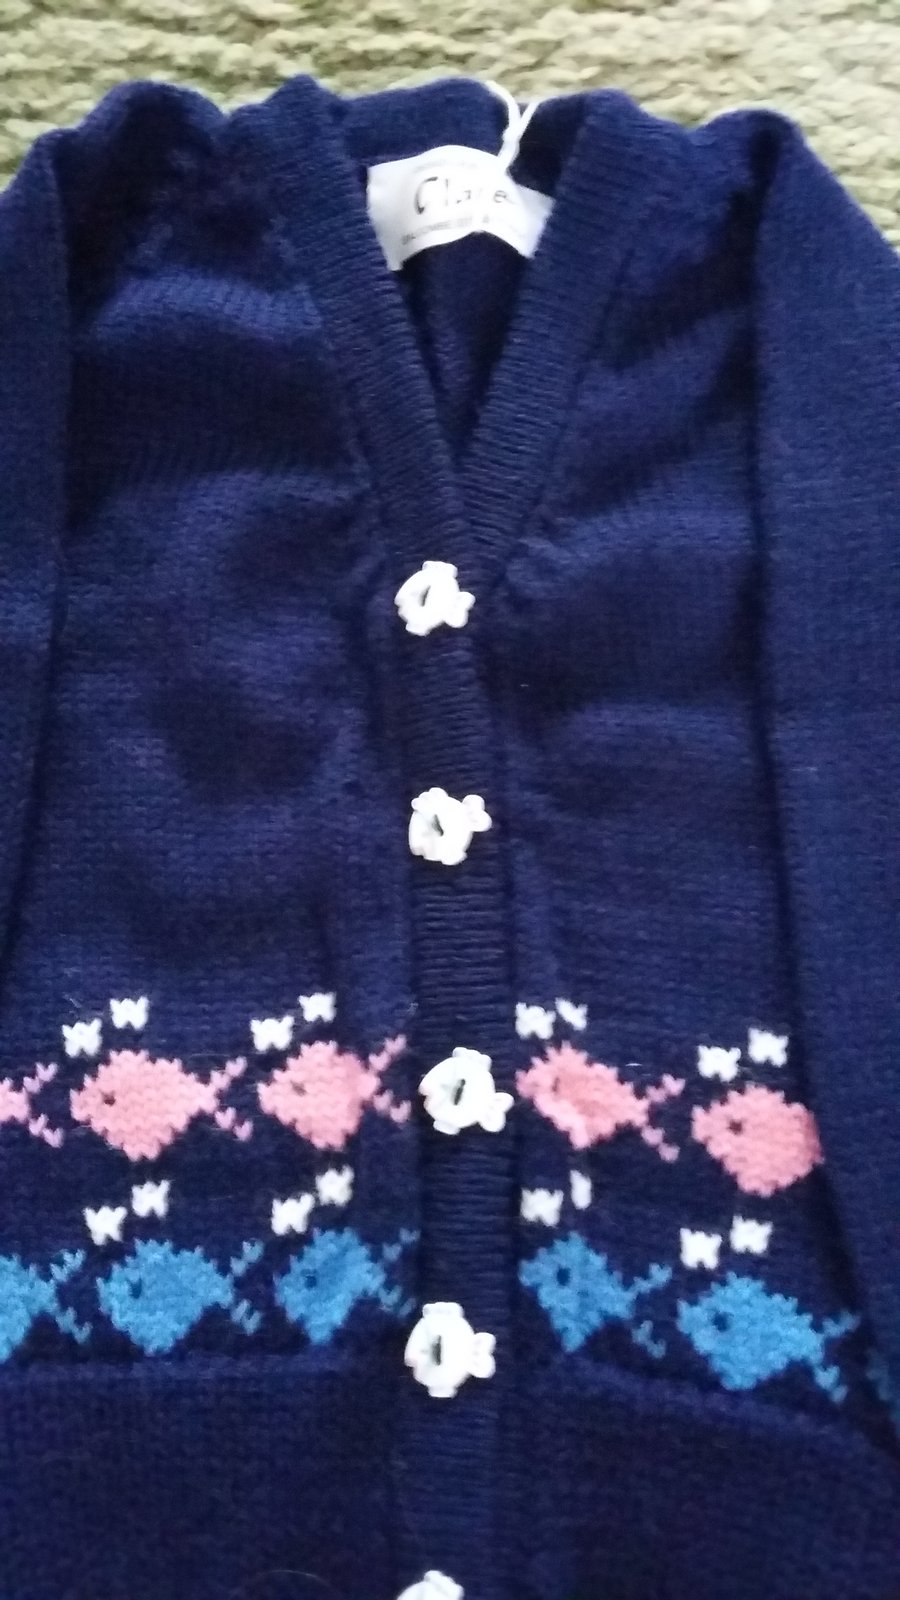 Cardigan or jumper with fish round the bottom